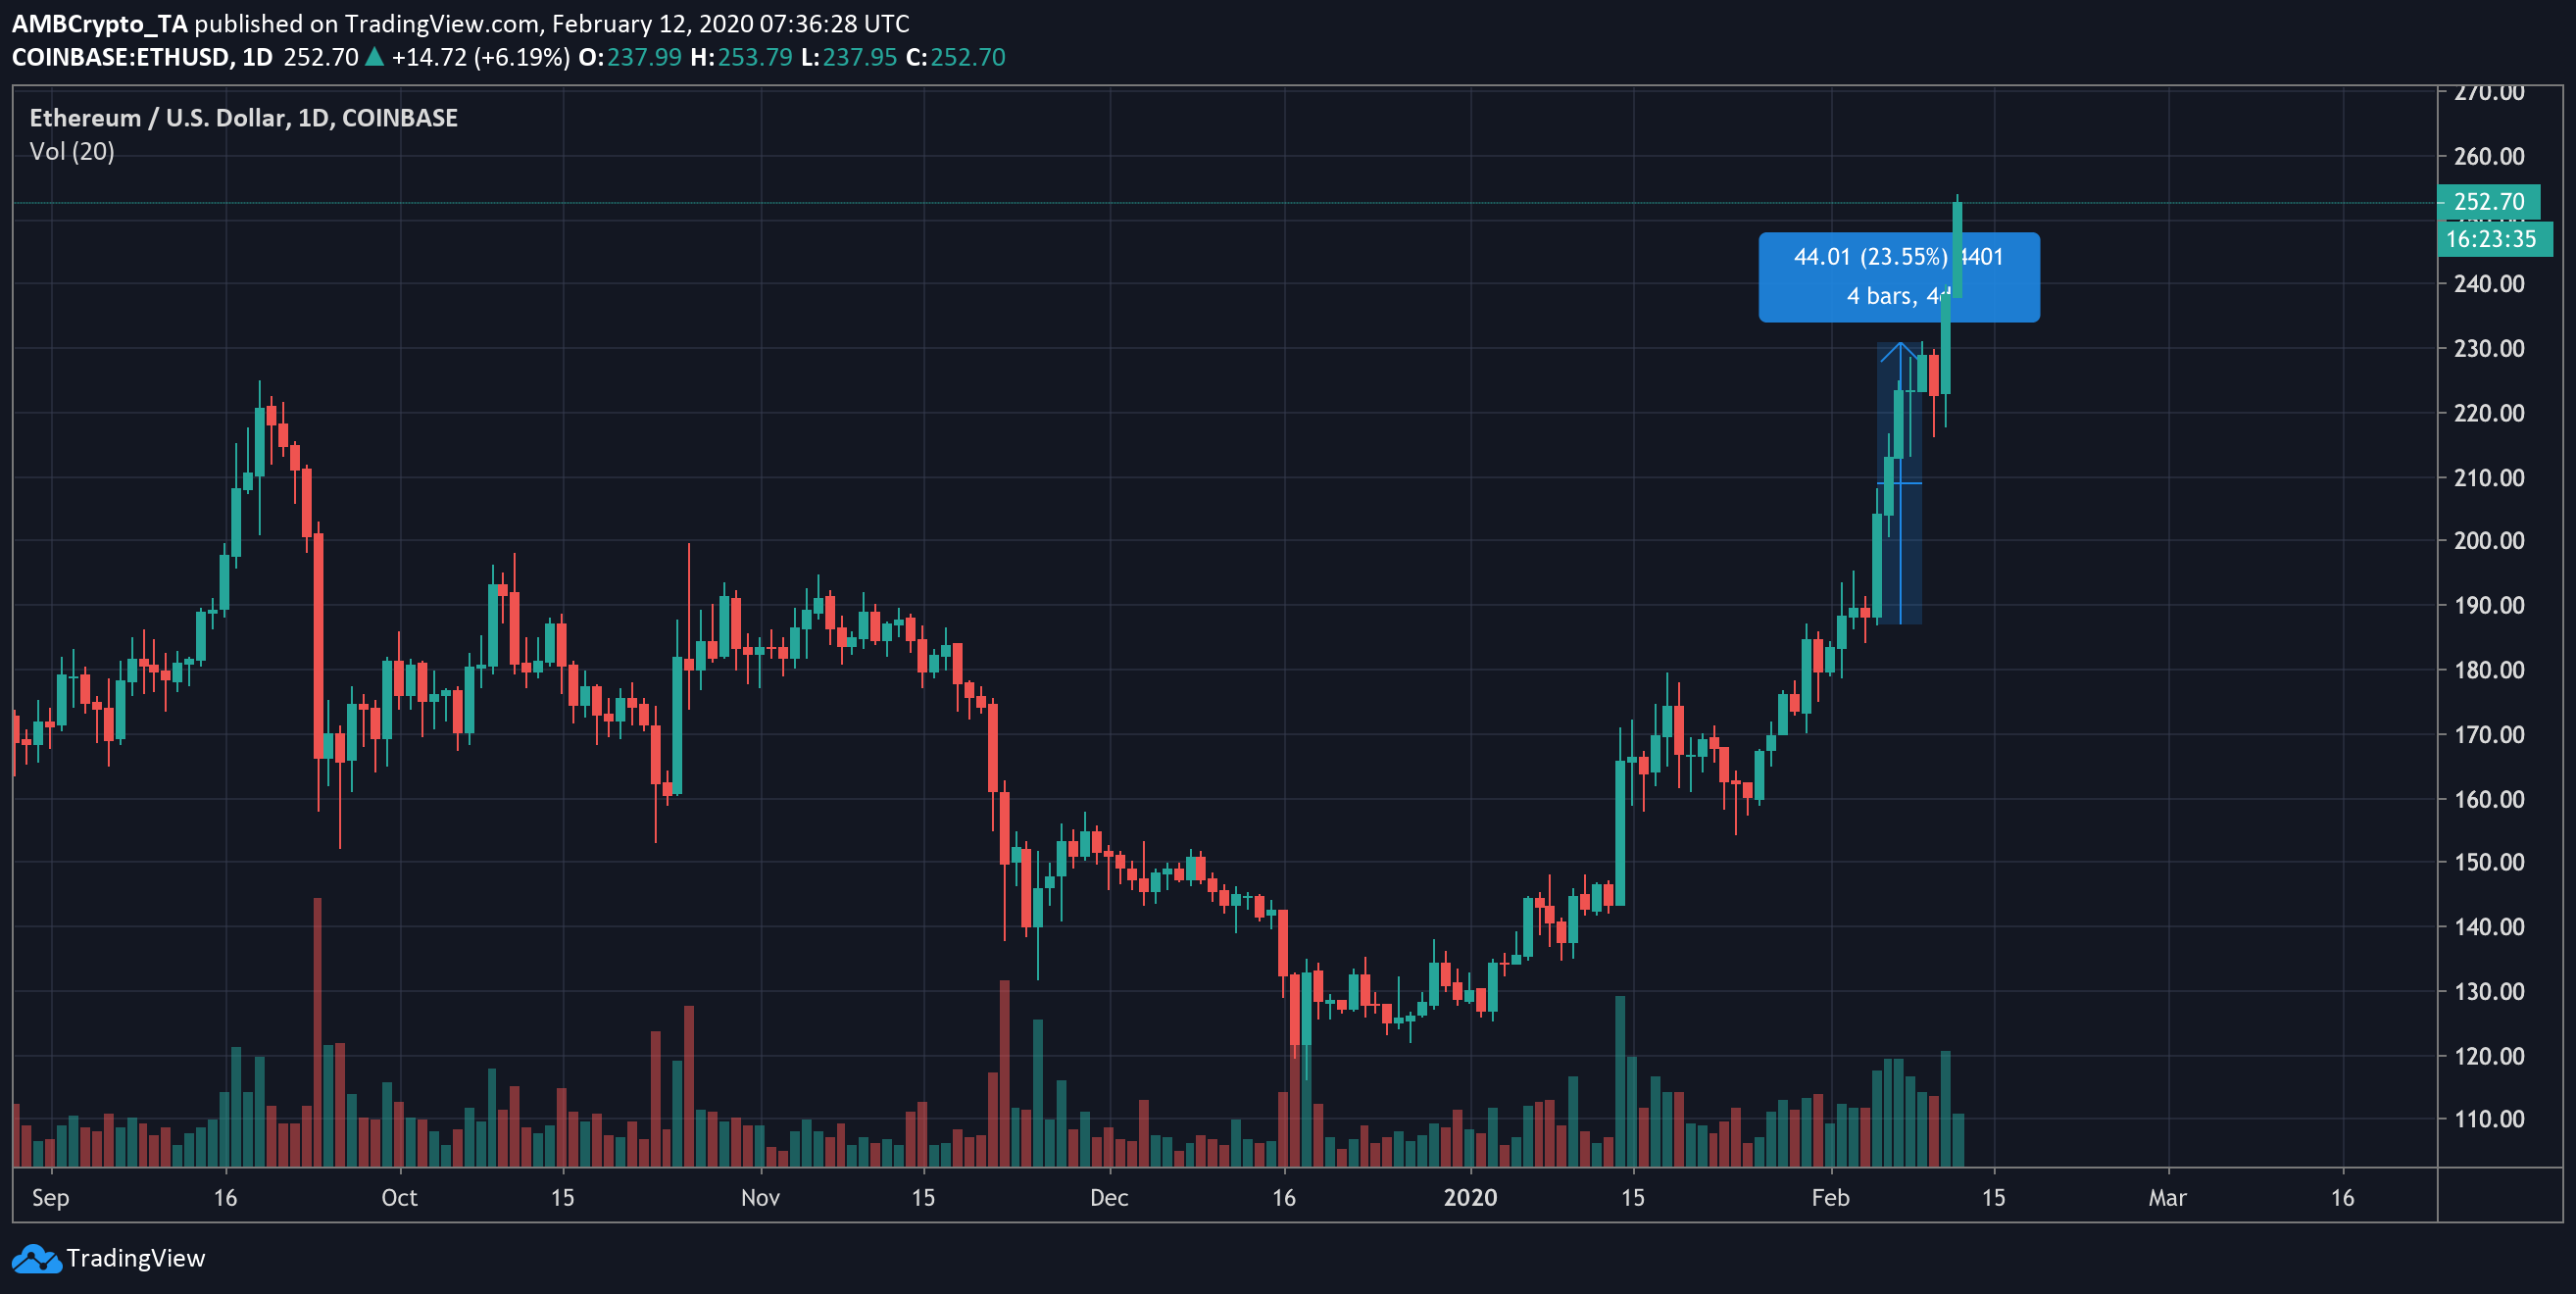 Source: ETH/USD on Trading View